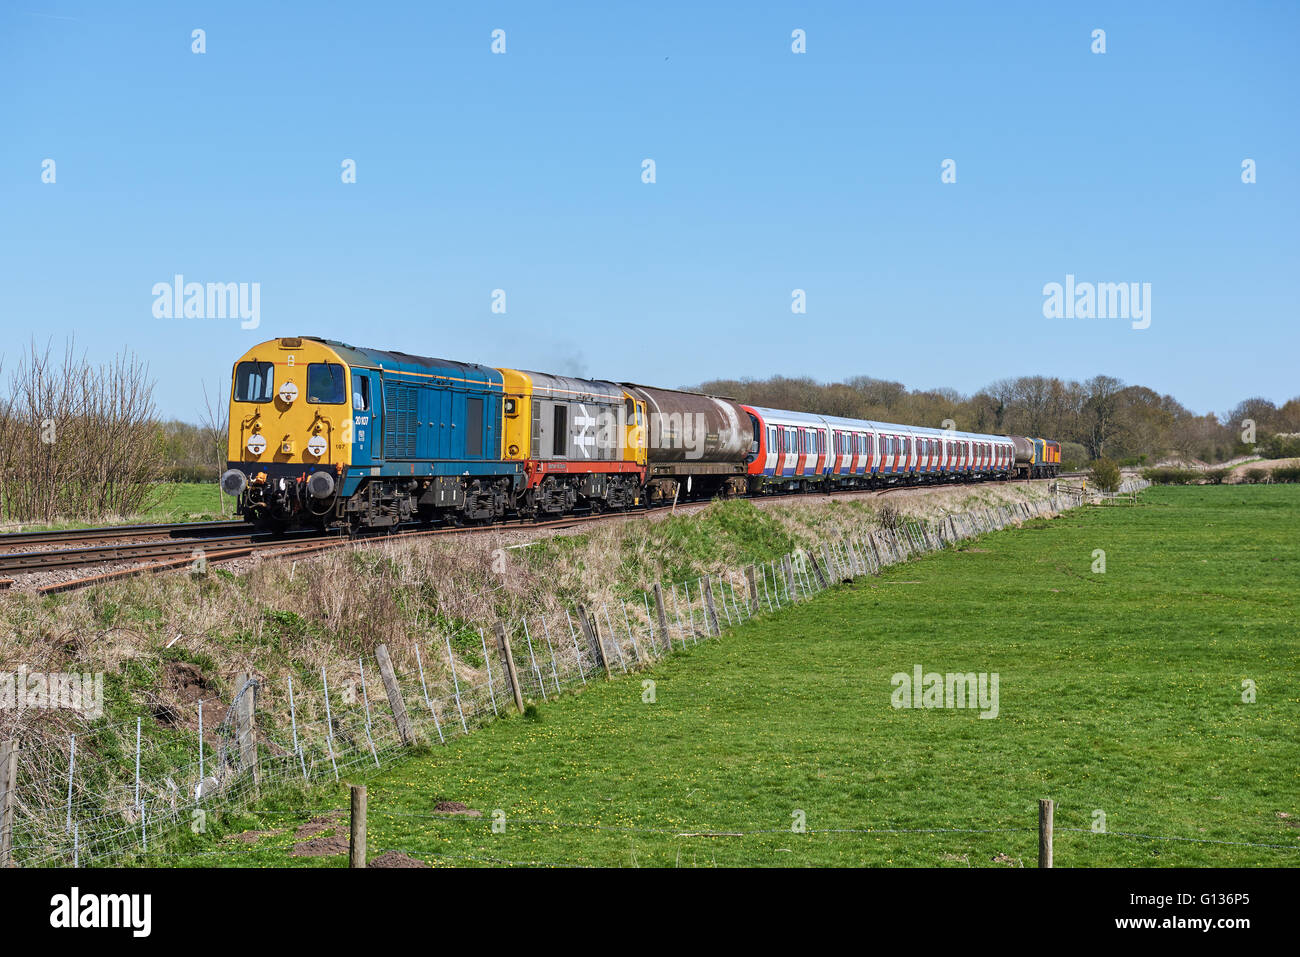 20107 & 20132 head 7X09 11:47 Old Dalby to West Ruislip LUL stock move through Rearsby on 20th April 2016. Stock Photo